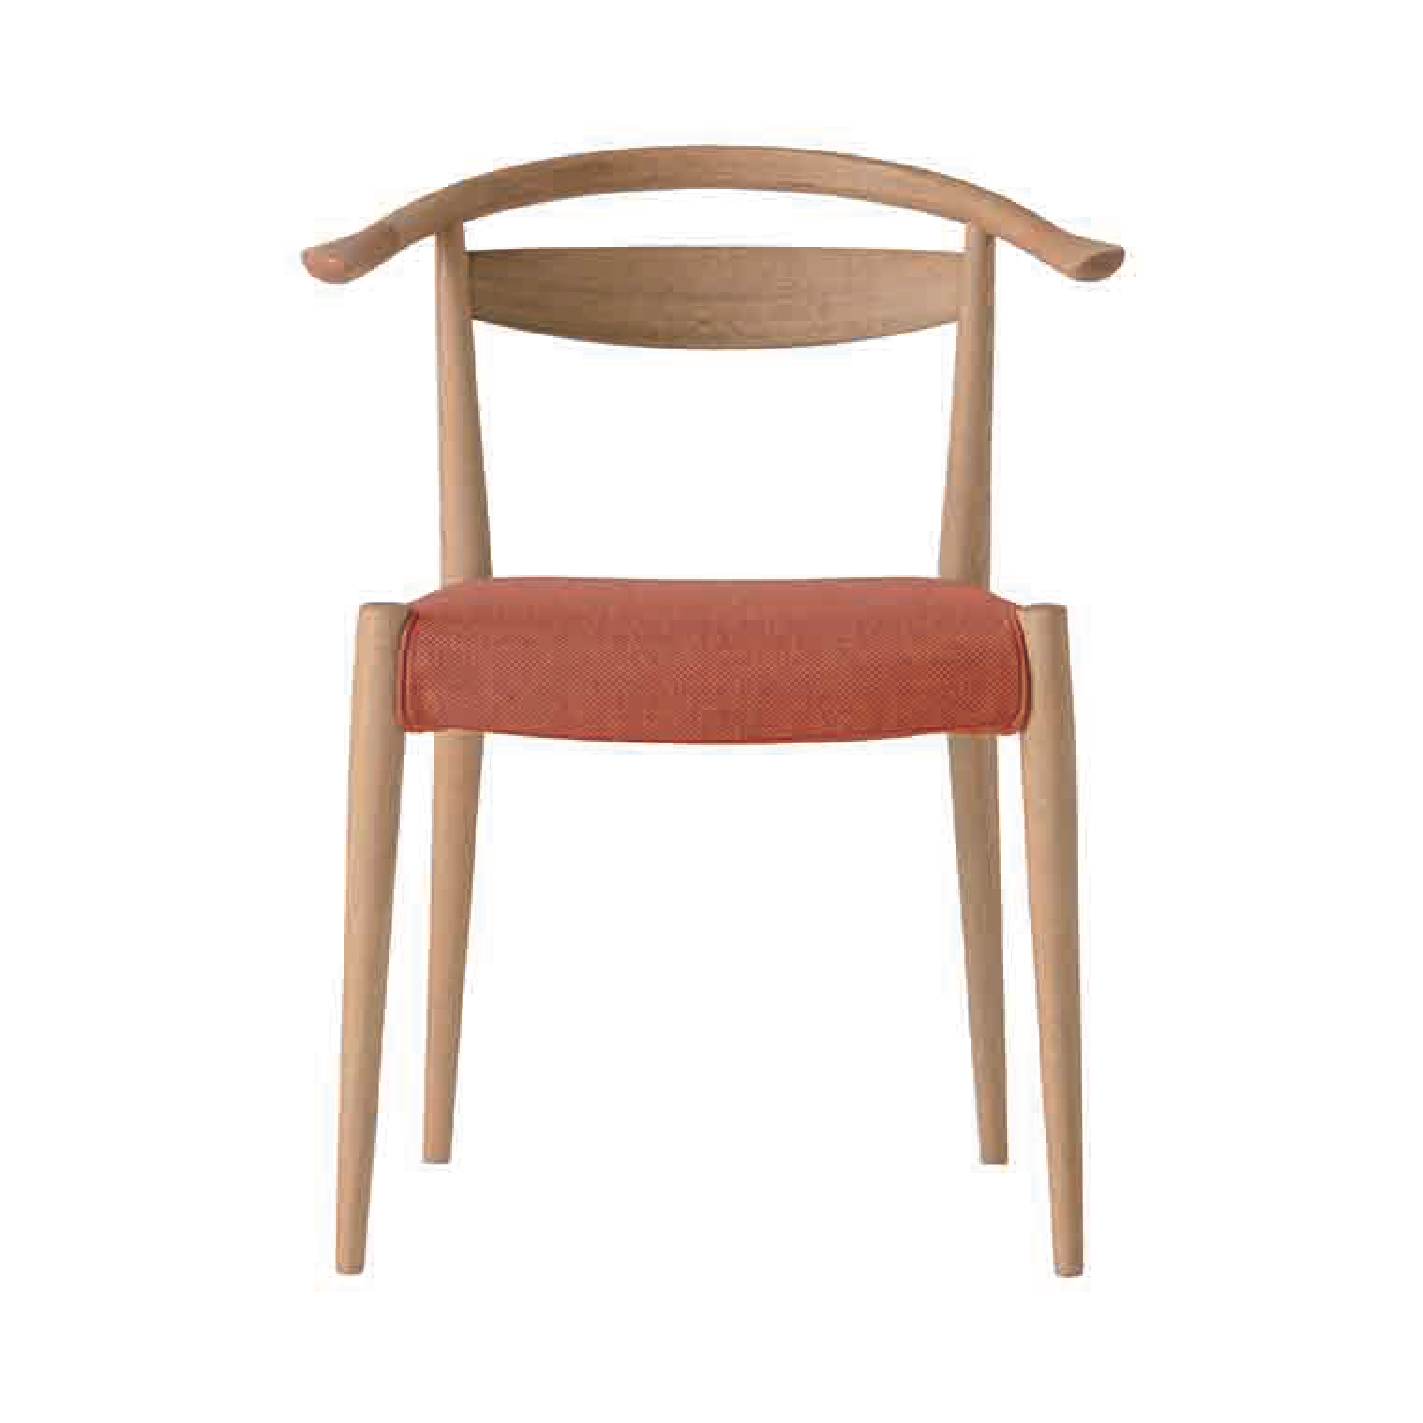 Nissin - WOC-132 Dining Chair